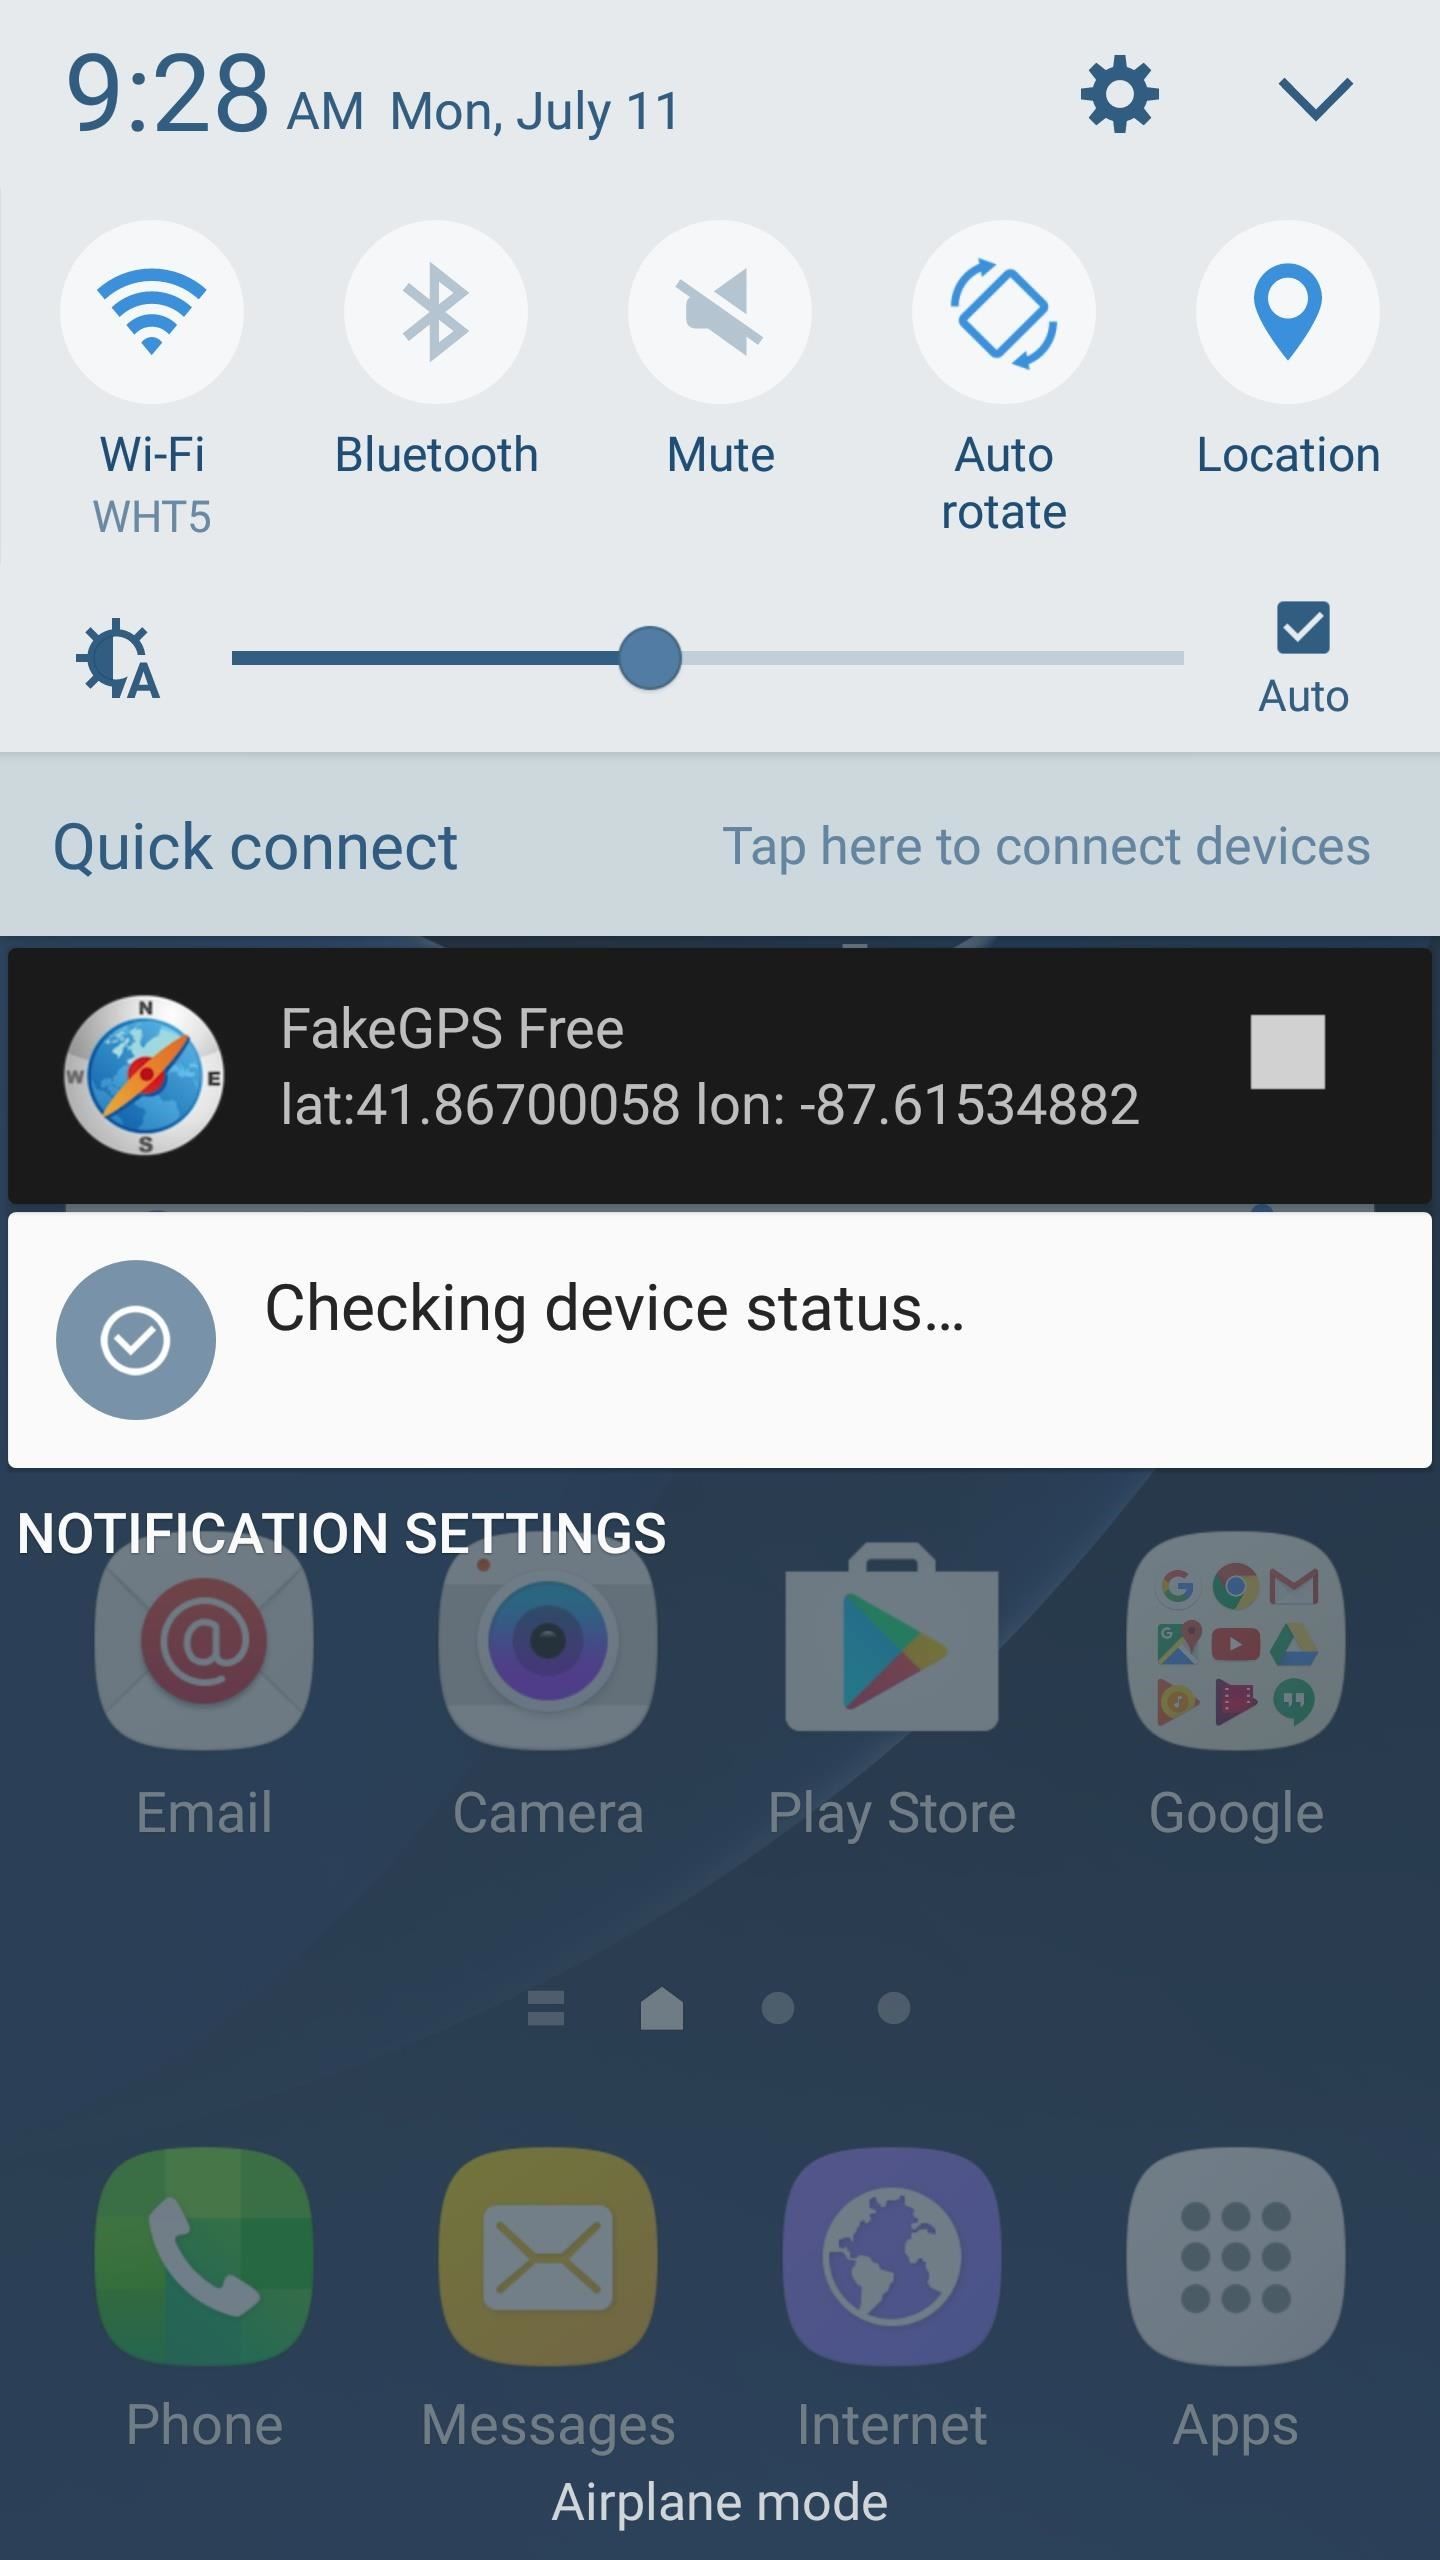 How to Fake Your GPS Location & Movement to Cheat at Pokémon GO on Android